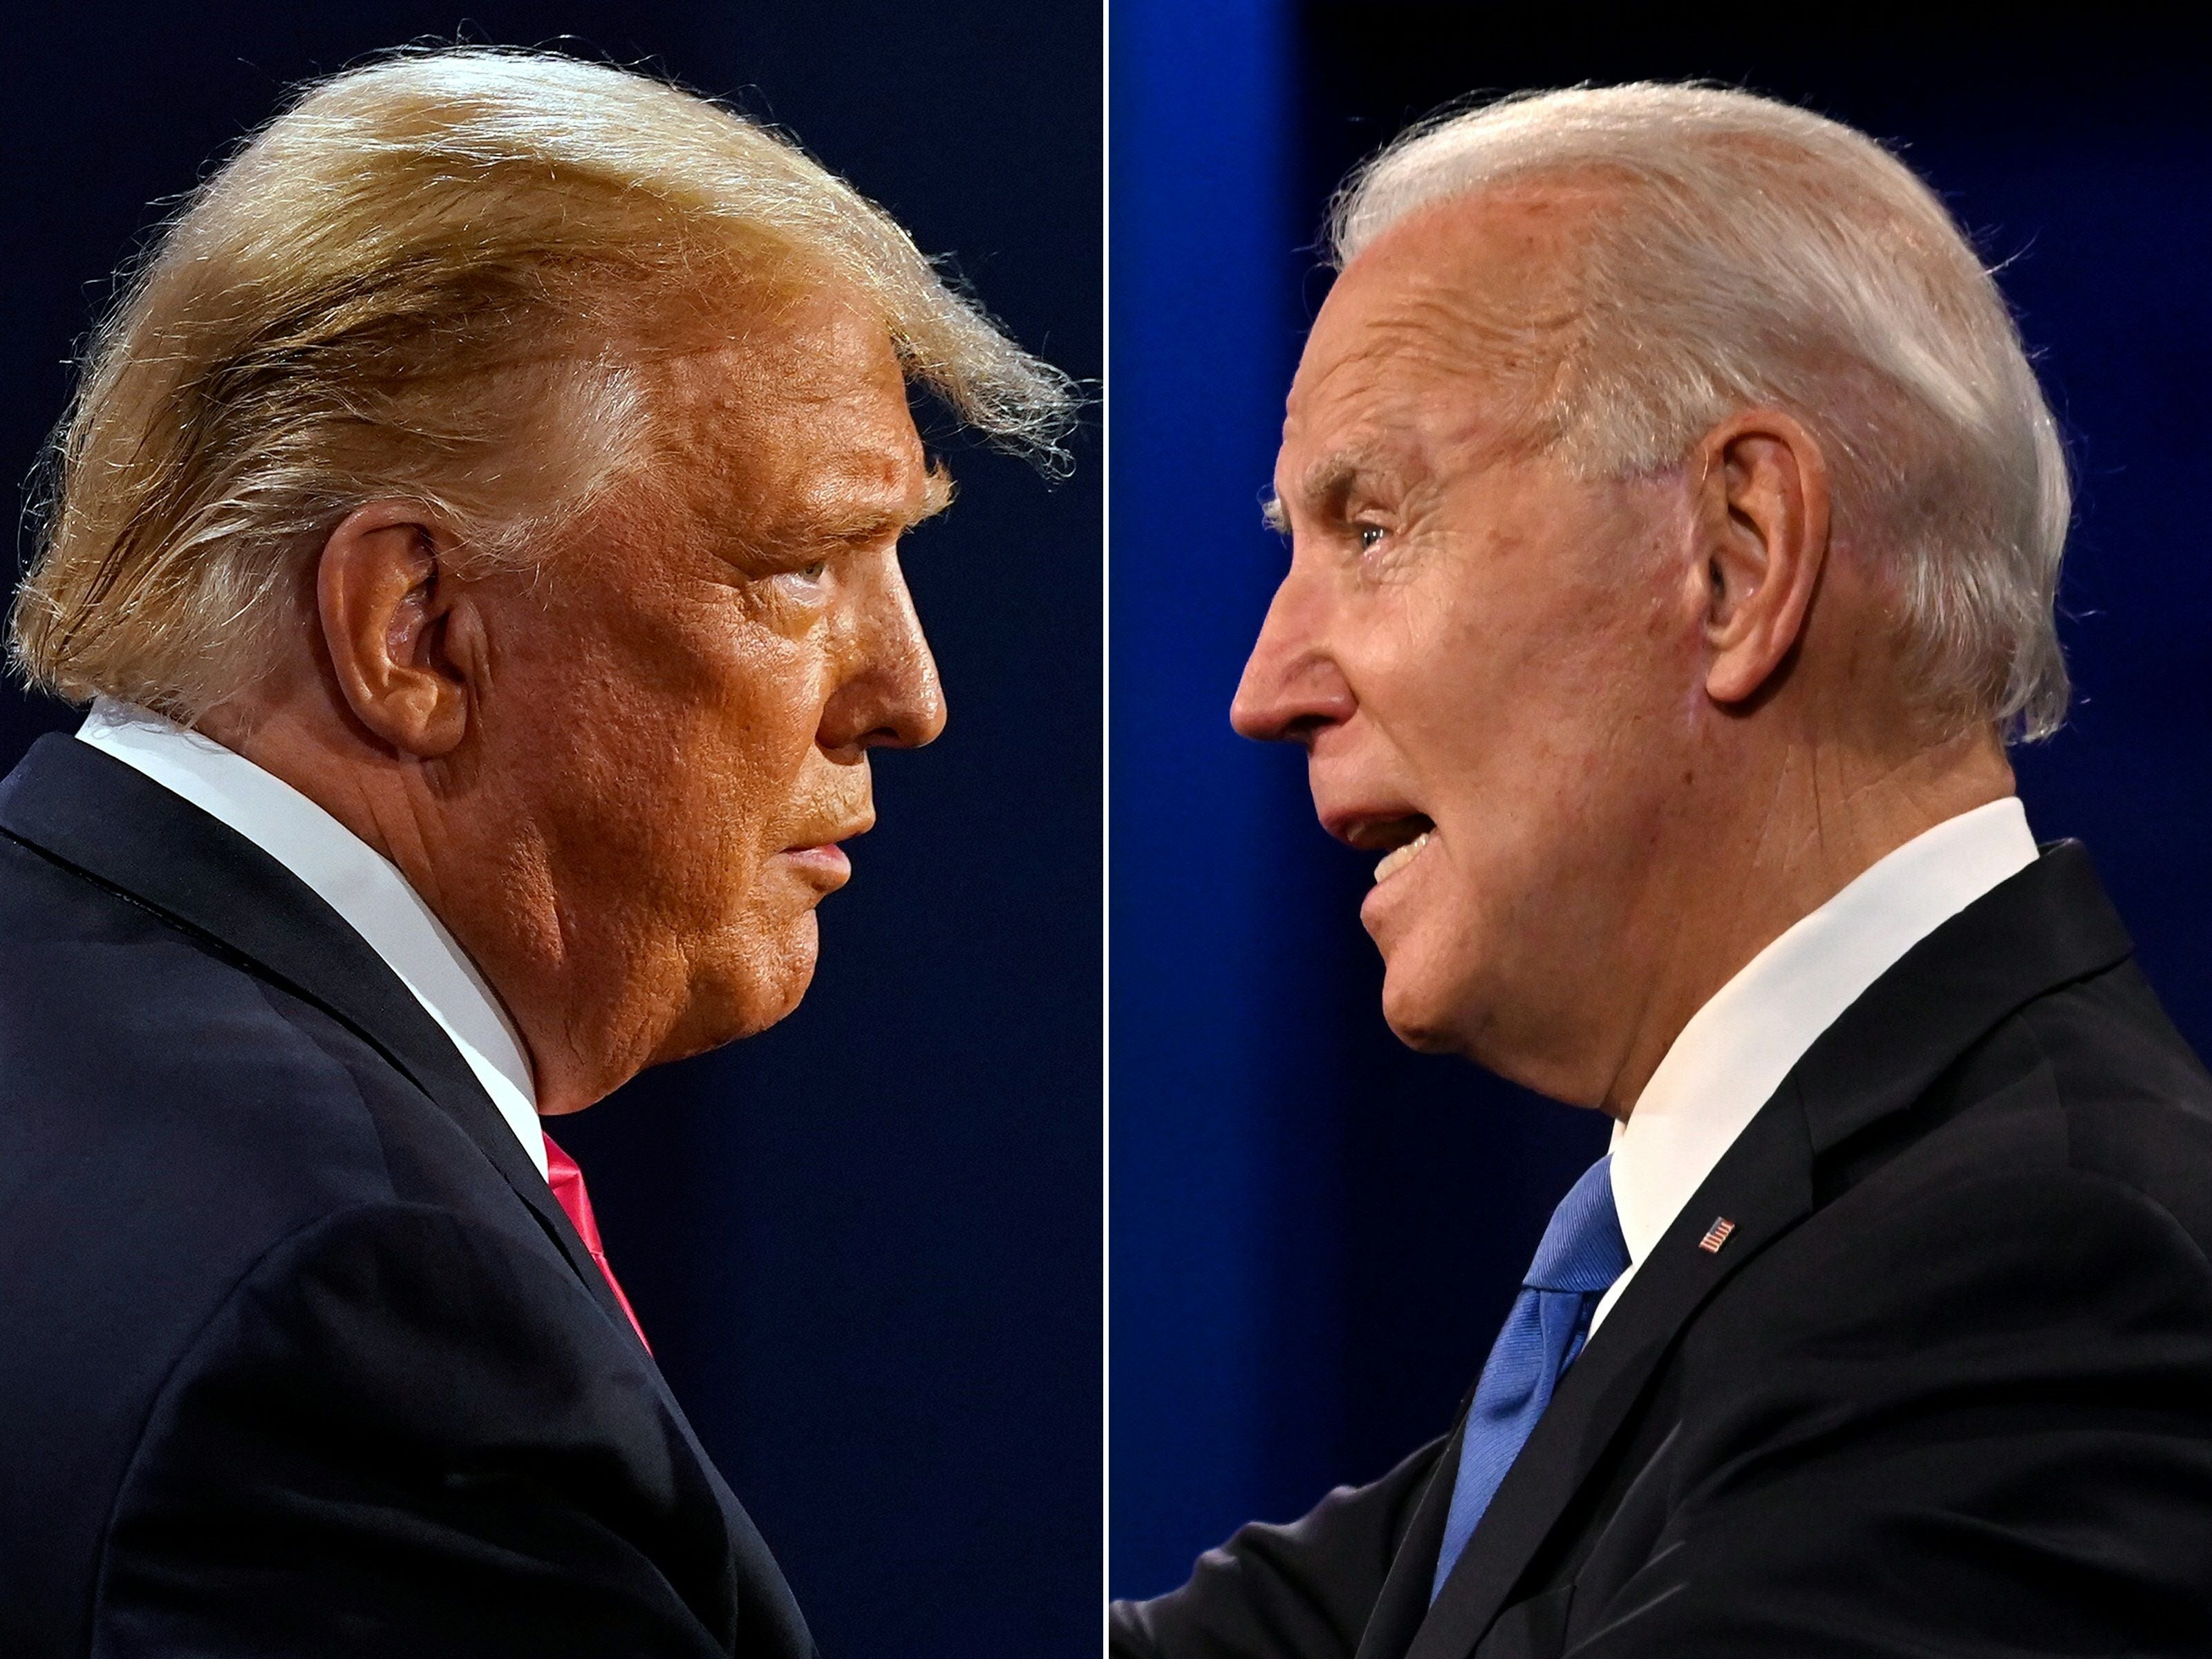 Joe Biden, right, will face a number of similar policy issues during his presidency as Donald Trump